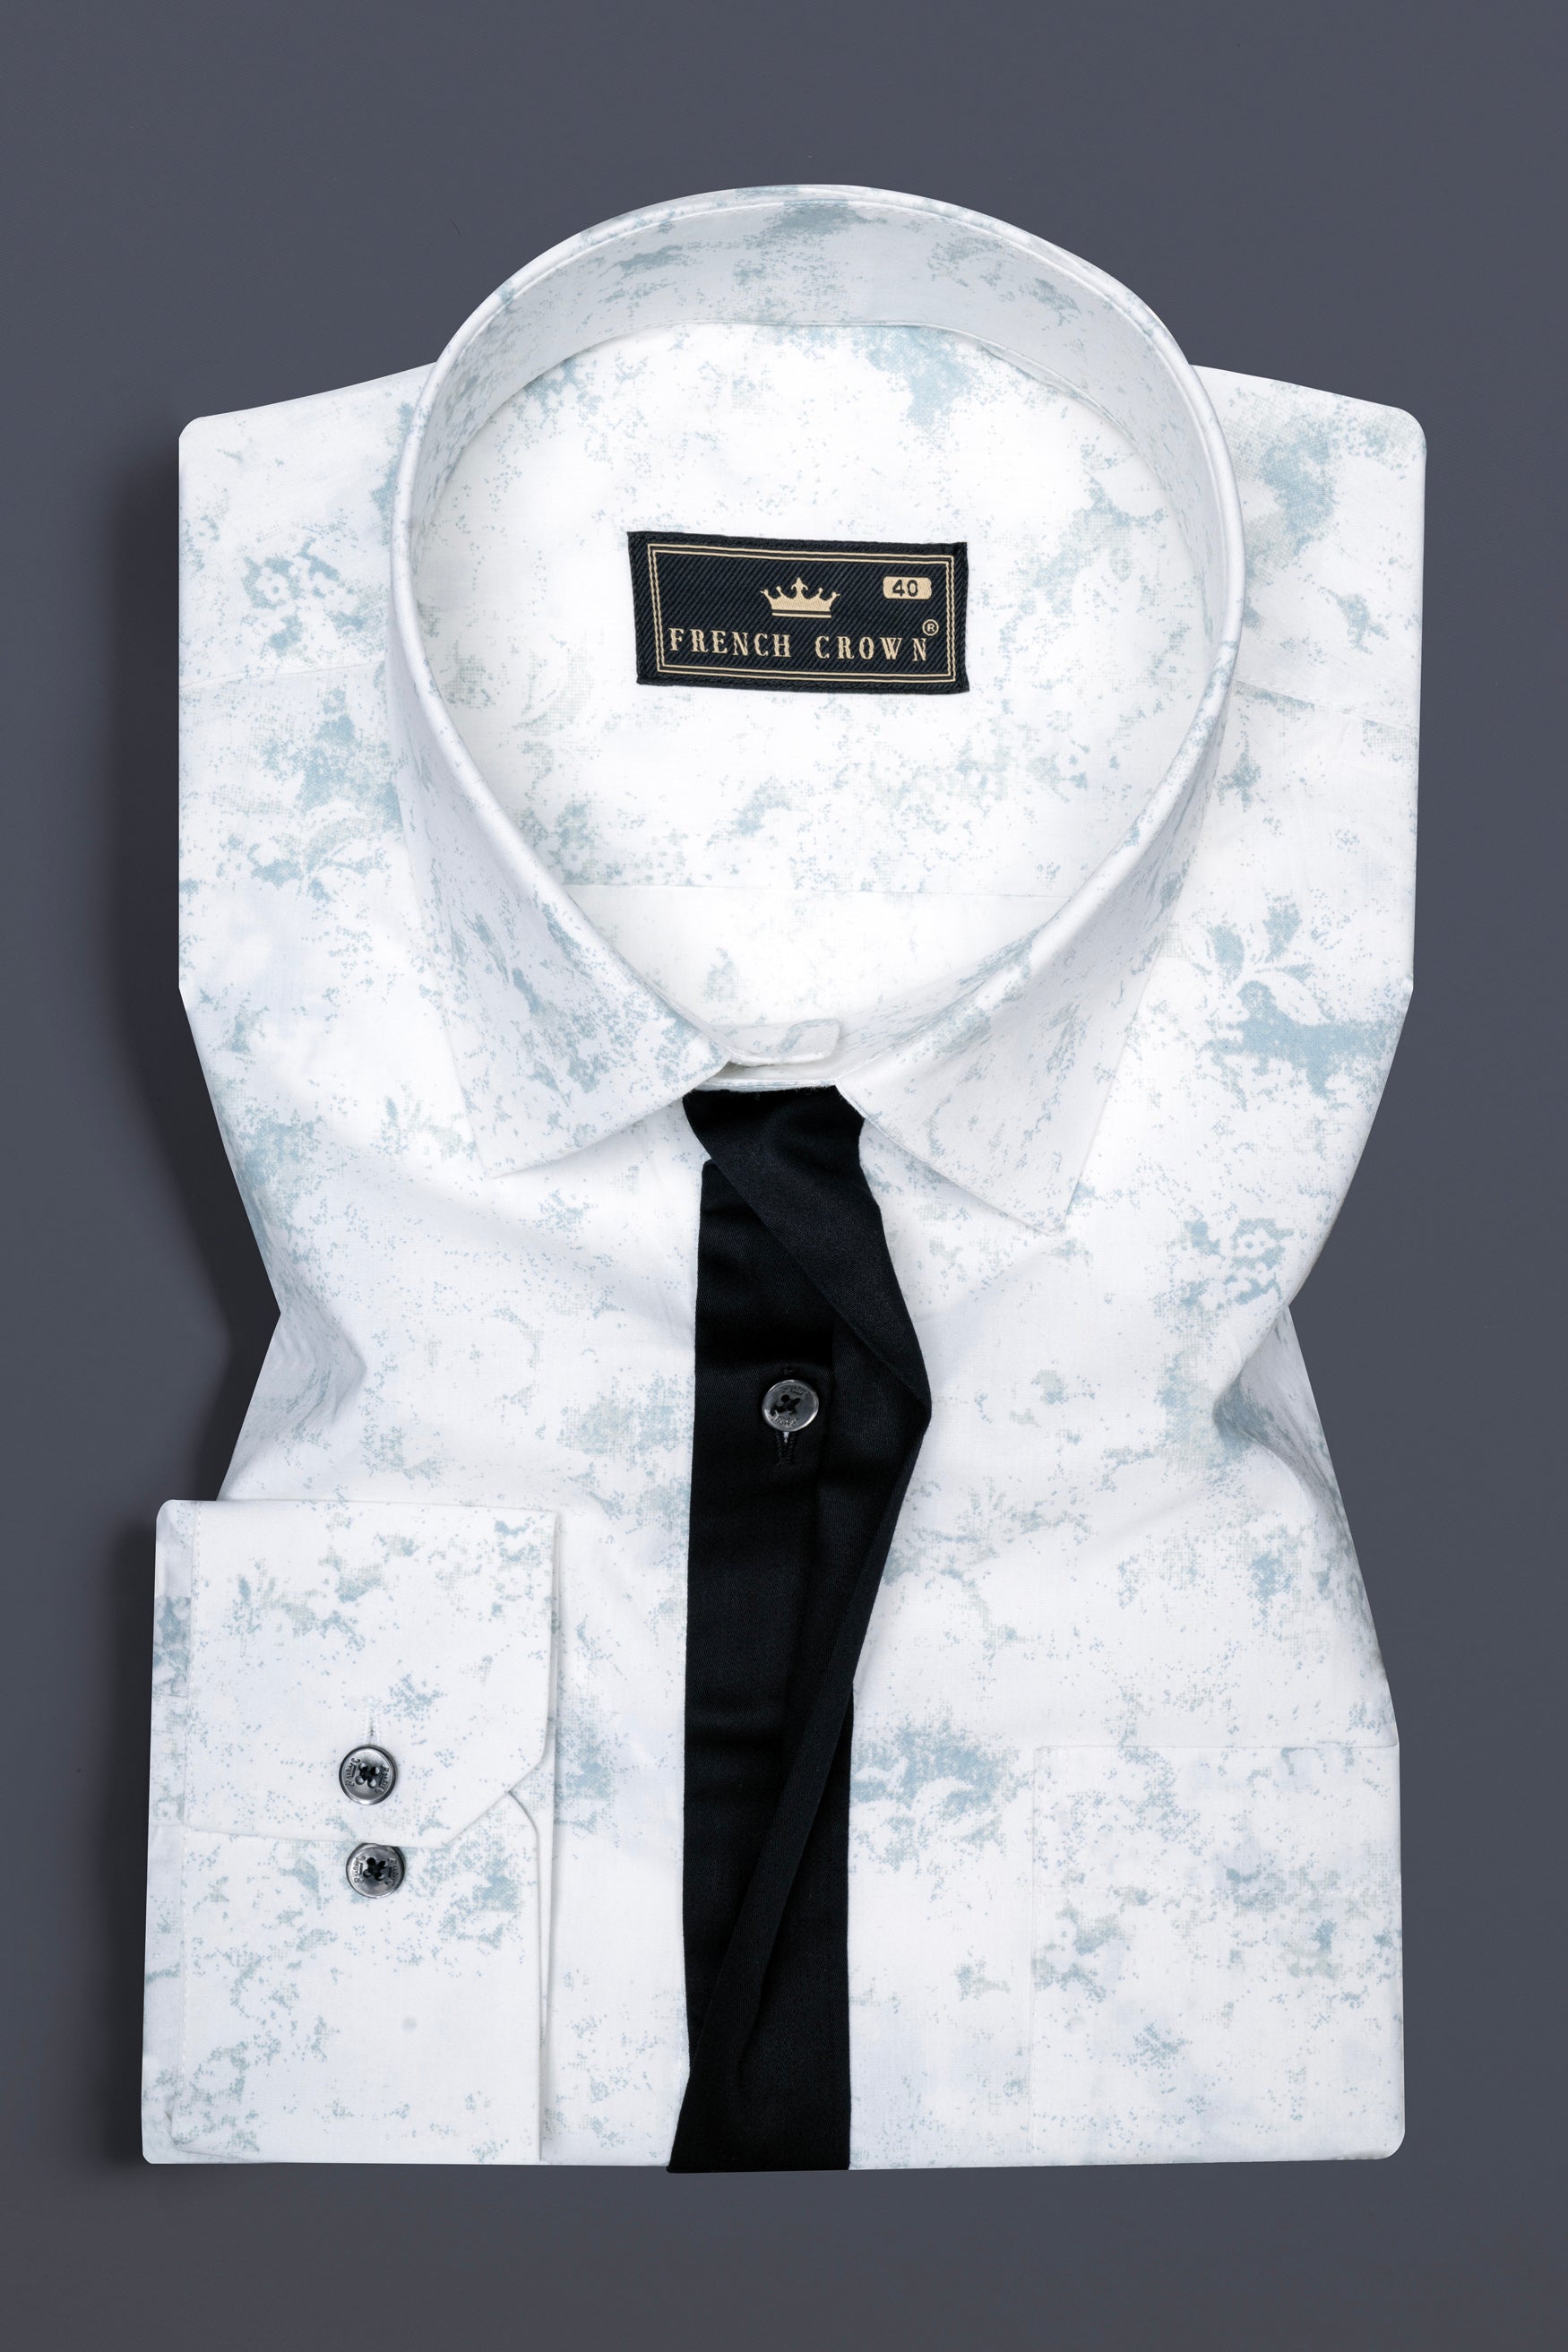 Bright White with French Gray Marble Prints with Black Button Patti Placket Super Soft Premium Designer Shirt